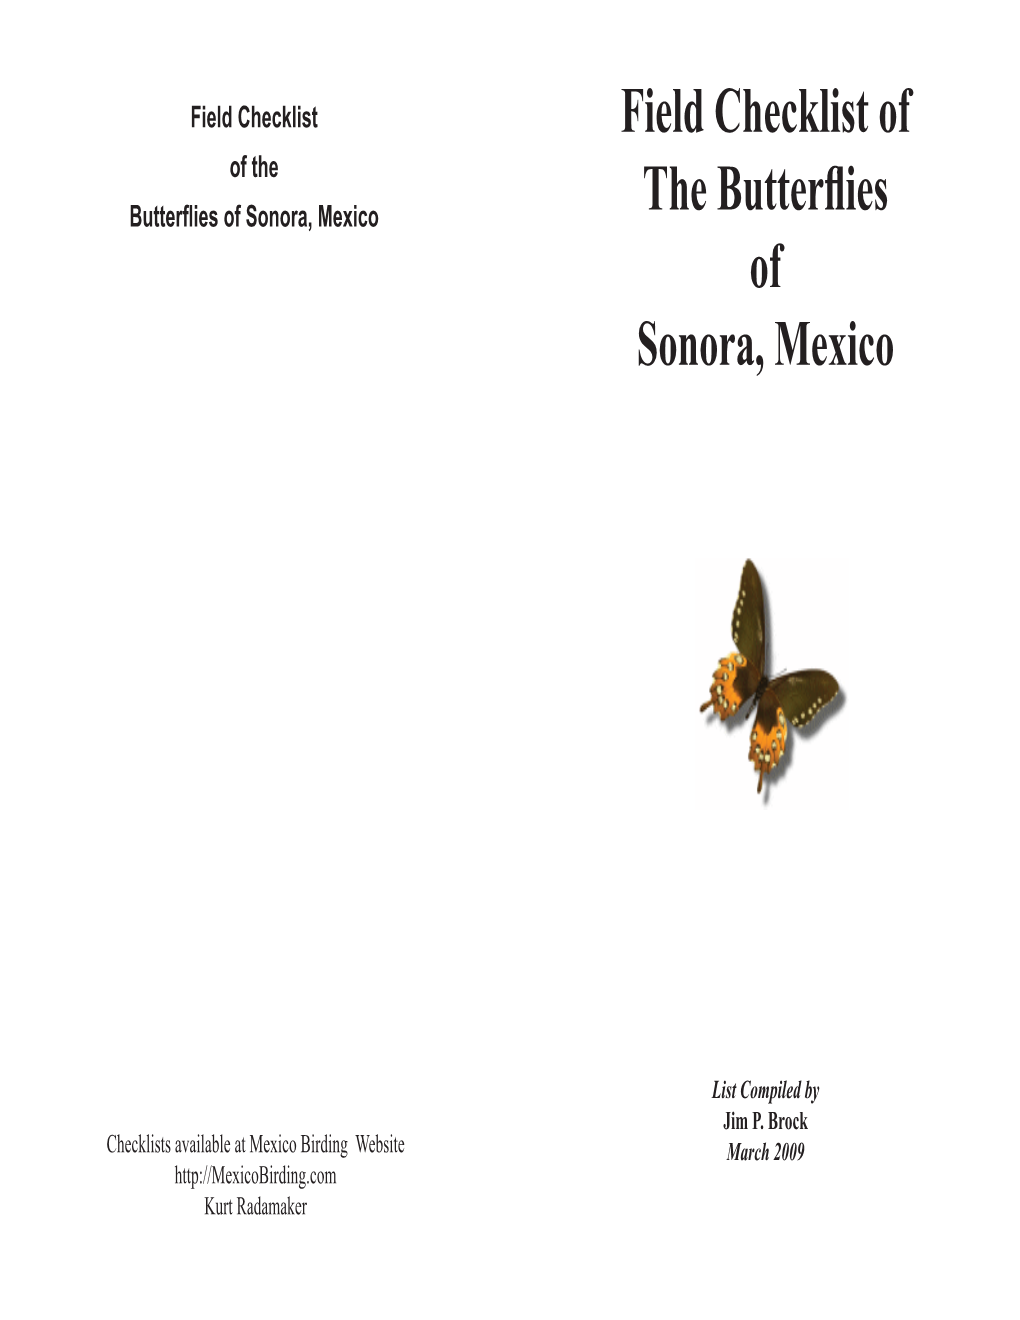 Field Checklist of the Butterflies of Sonora, Mexico